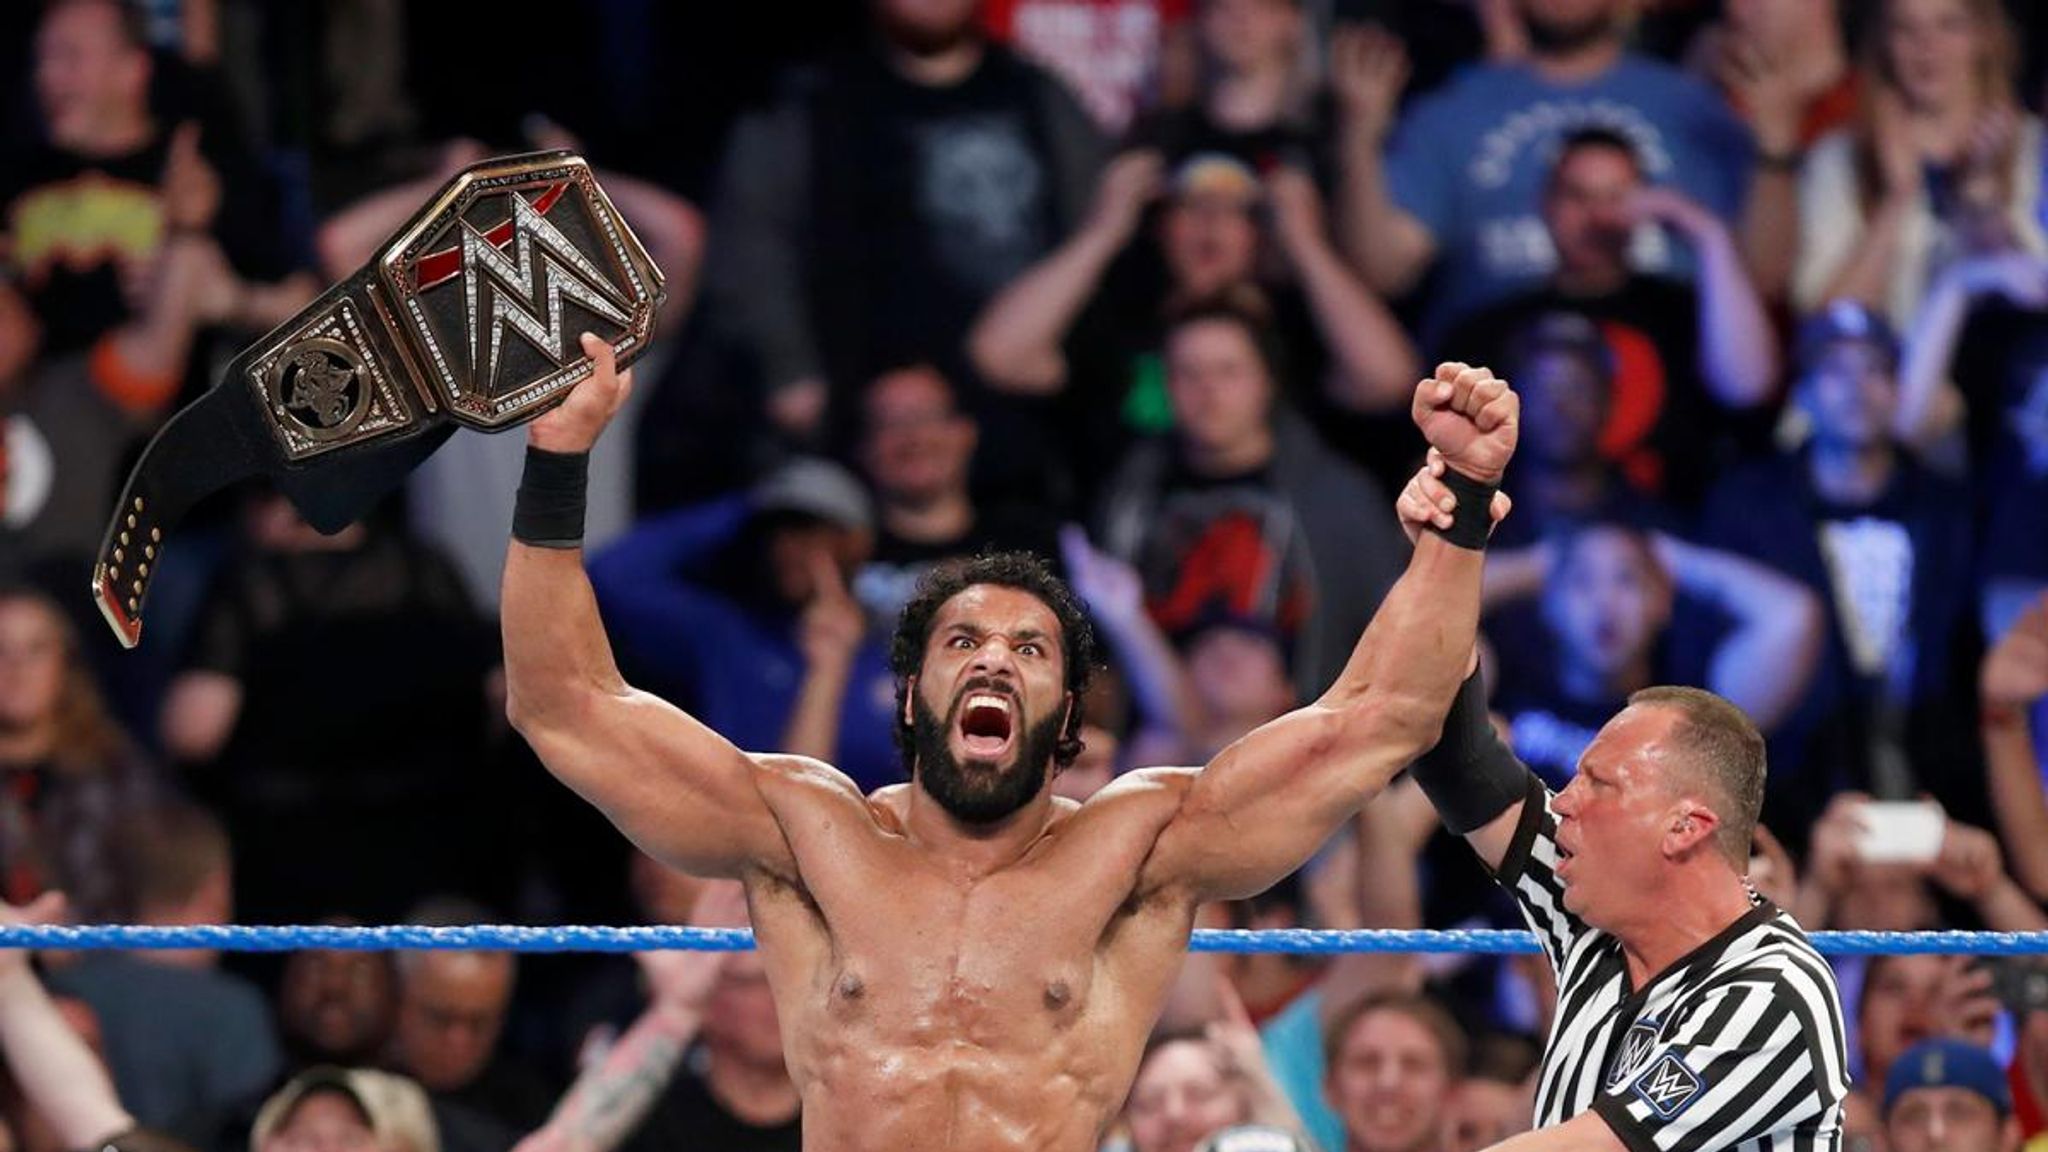 Wwe The Unlikely Rise Of Jinder Mahal Wwe News Sky Sports